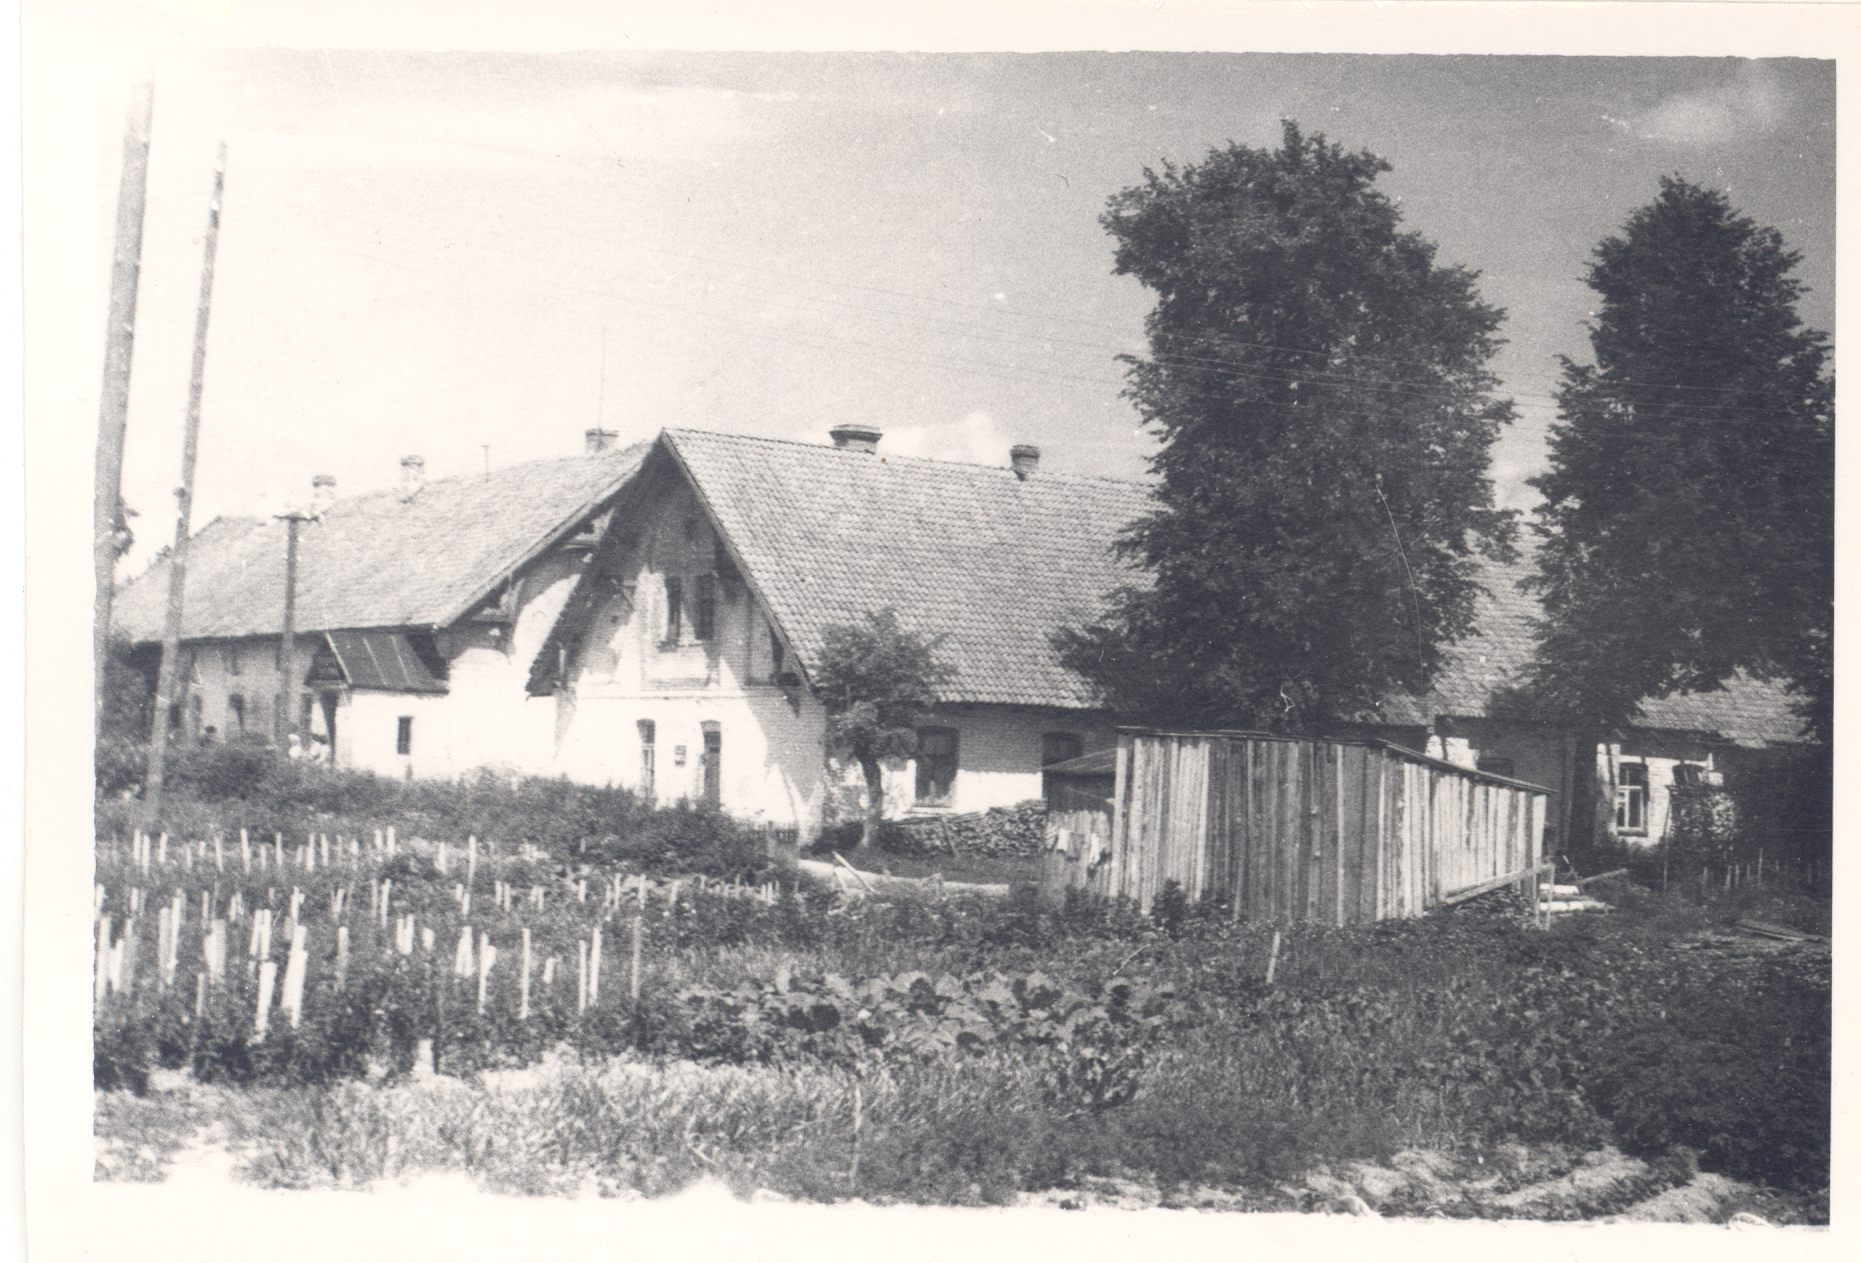 A. Kitzberg's first place of residence in Kalkuni on the table in 1961